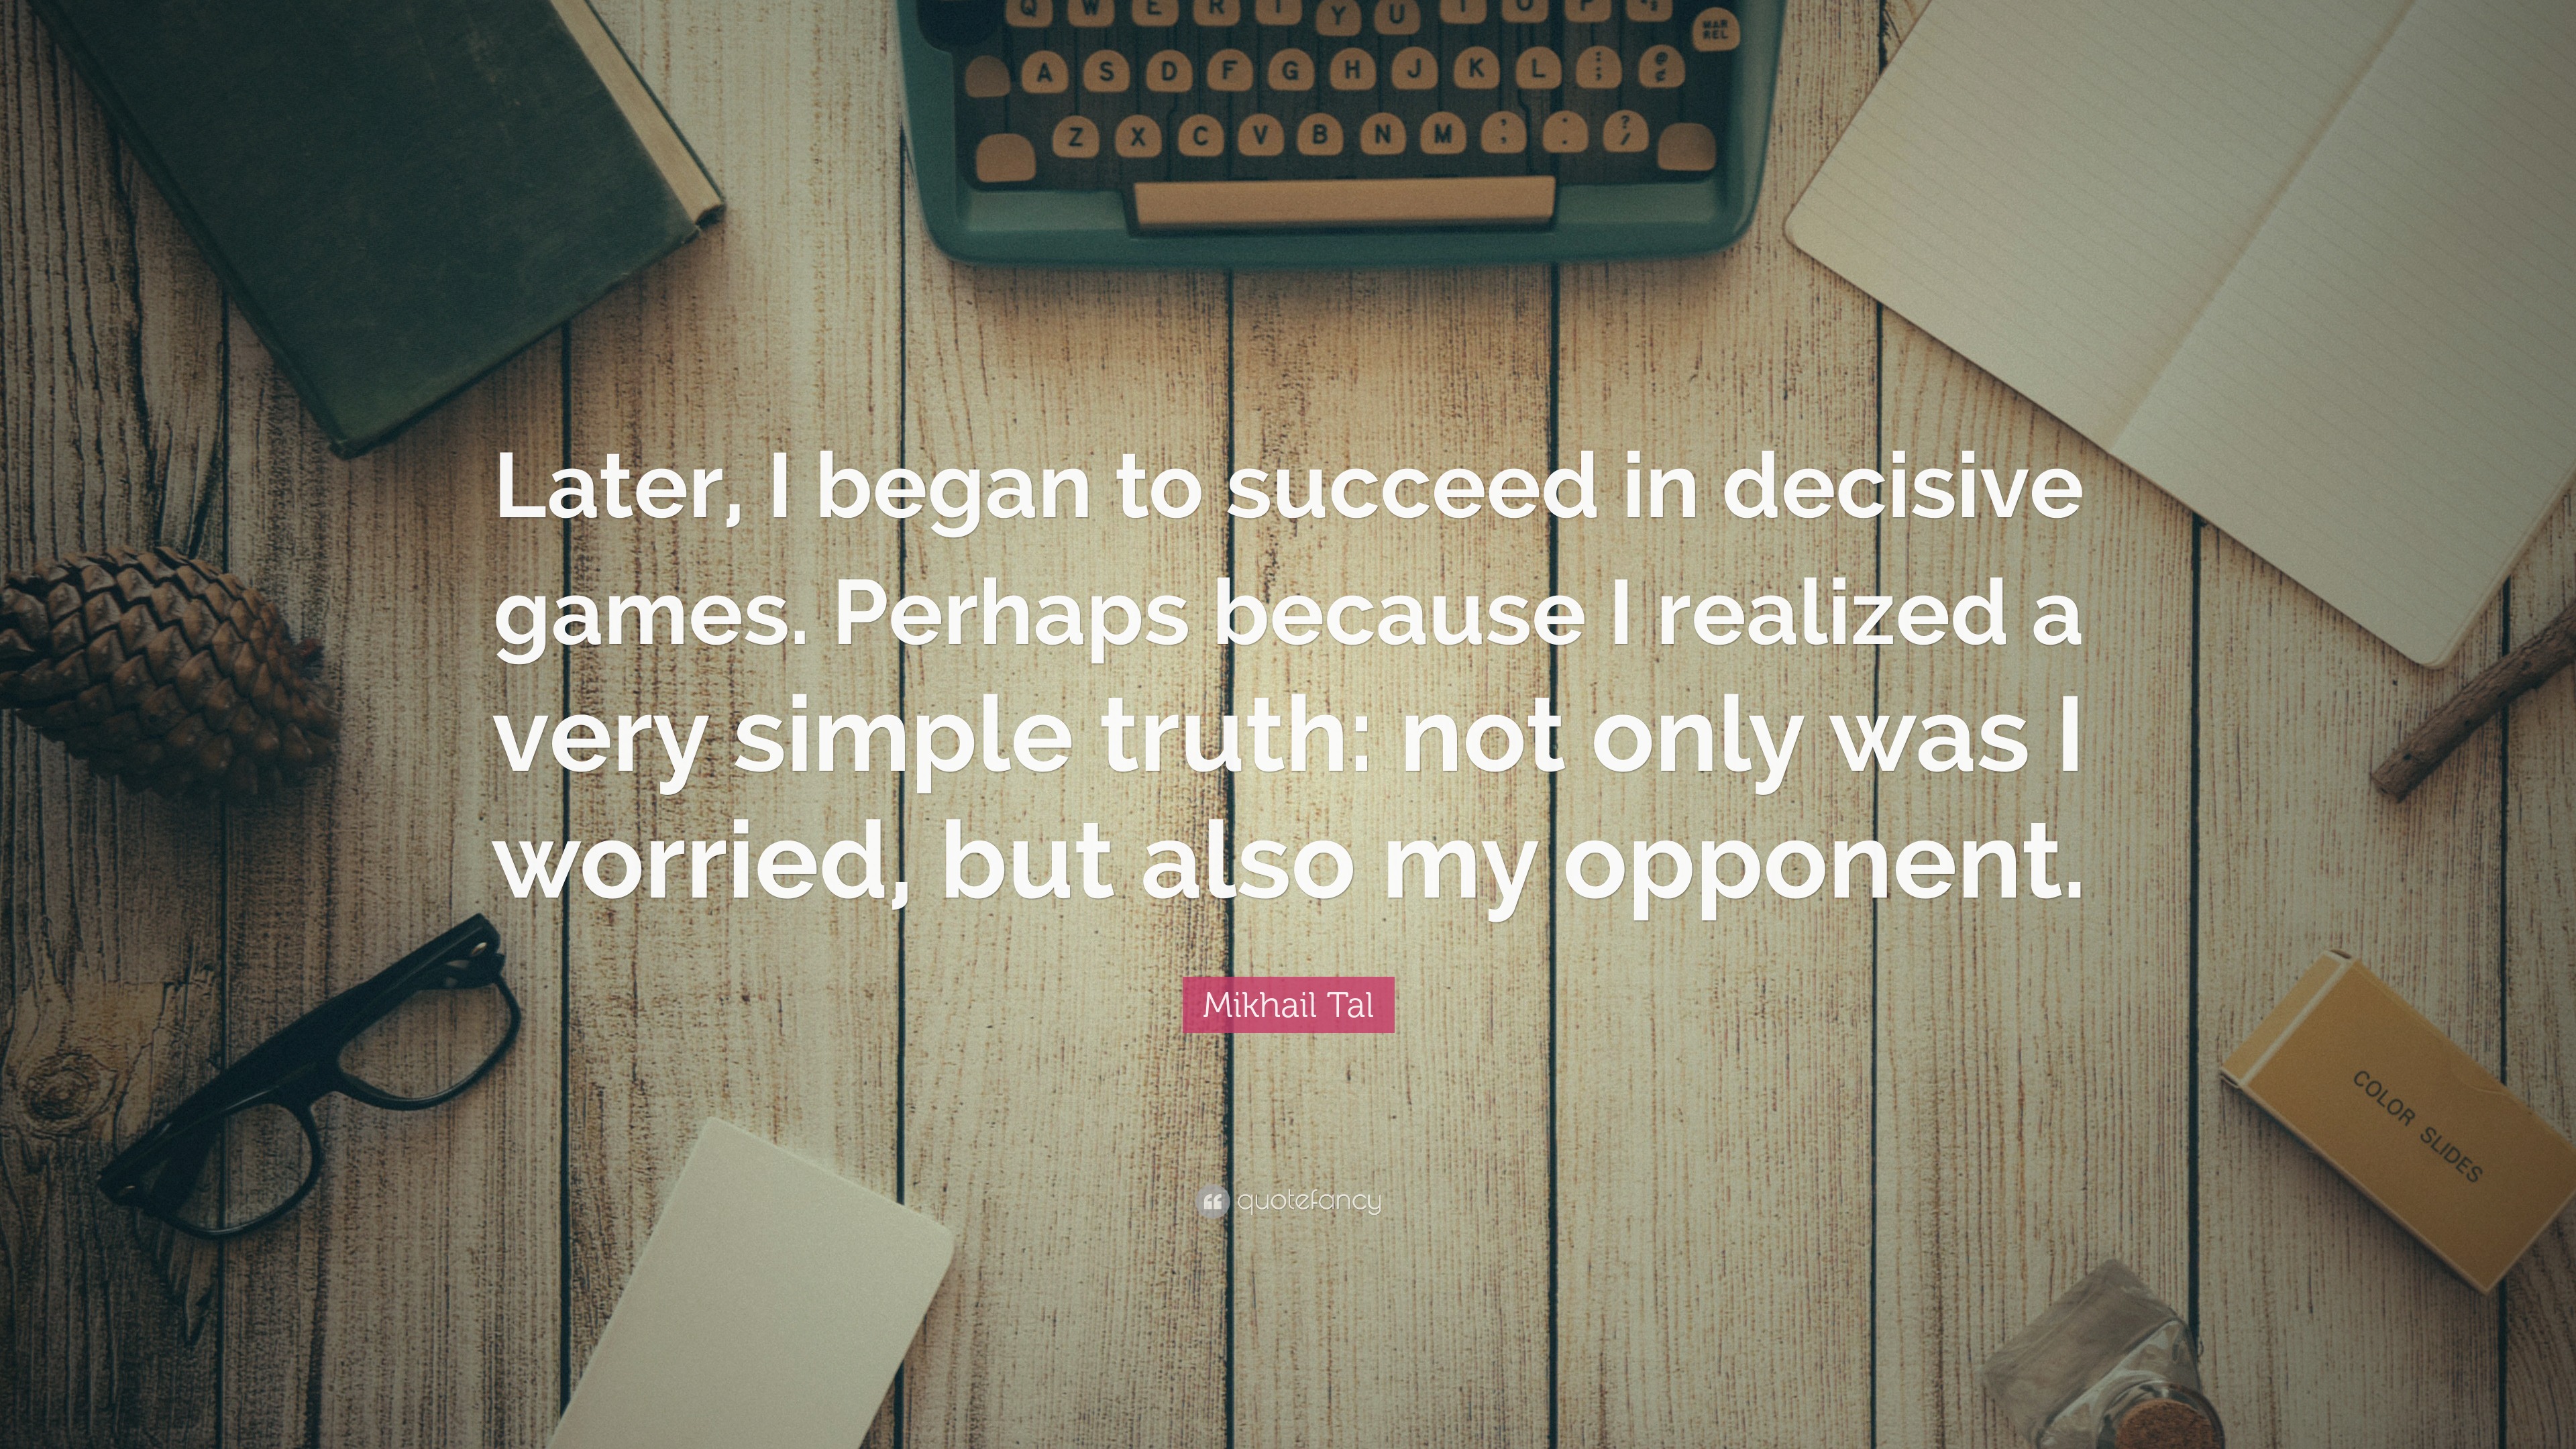 Mikhail Tal i Realized a Very Simple Truth: Not Only 